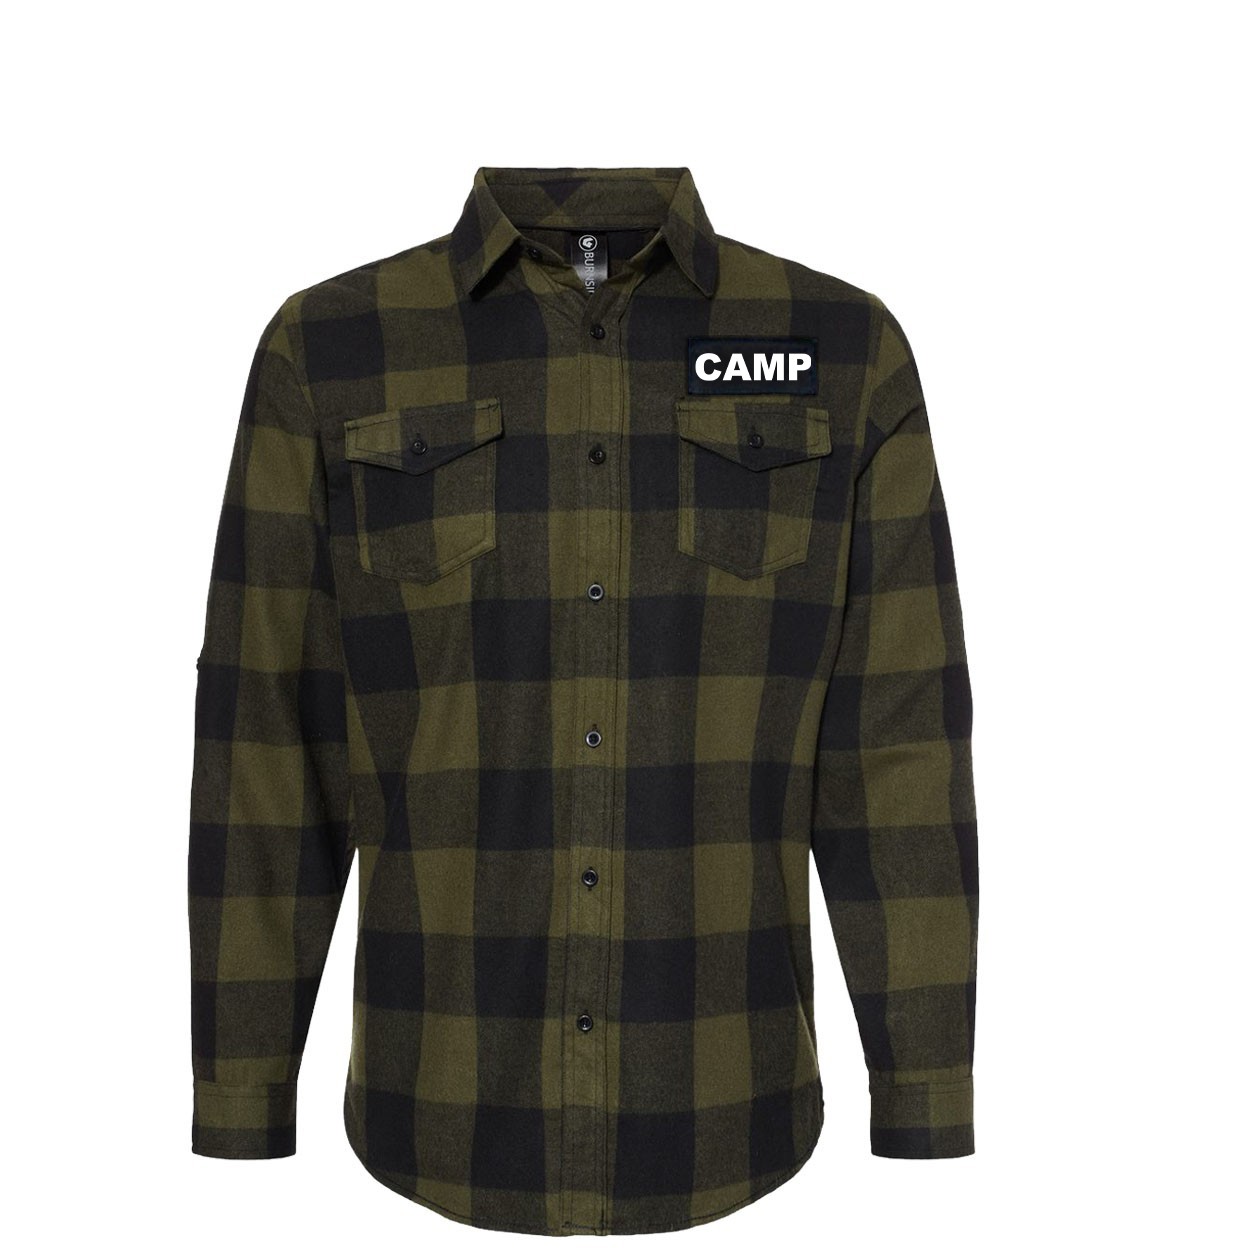 Camp Brand Logo Classic Unisex Long Sleeve Woven Patch Flannel Shirt Army/Black (White Logo)